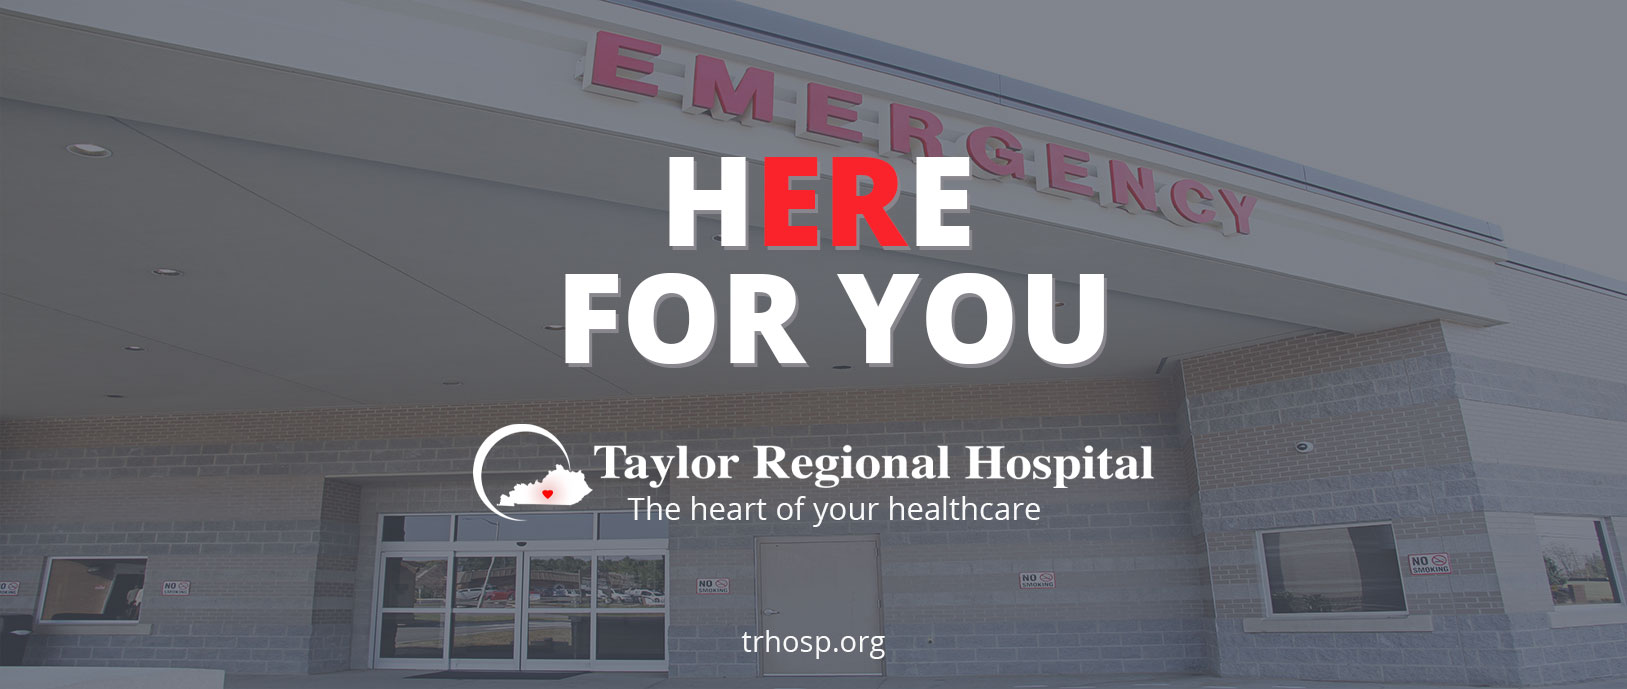 Banner picture of a faded background of the EMERGENCY Entrance to the Hospital. There is three large windows, automatic entry doors, a large single door, and Sogn that says EMERGENCY. Banner says:

HERE FOR YOU 
Taylor Regional Hospital
The heart of your healthcare 
troops.prg